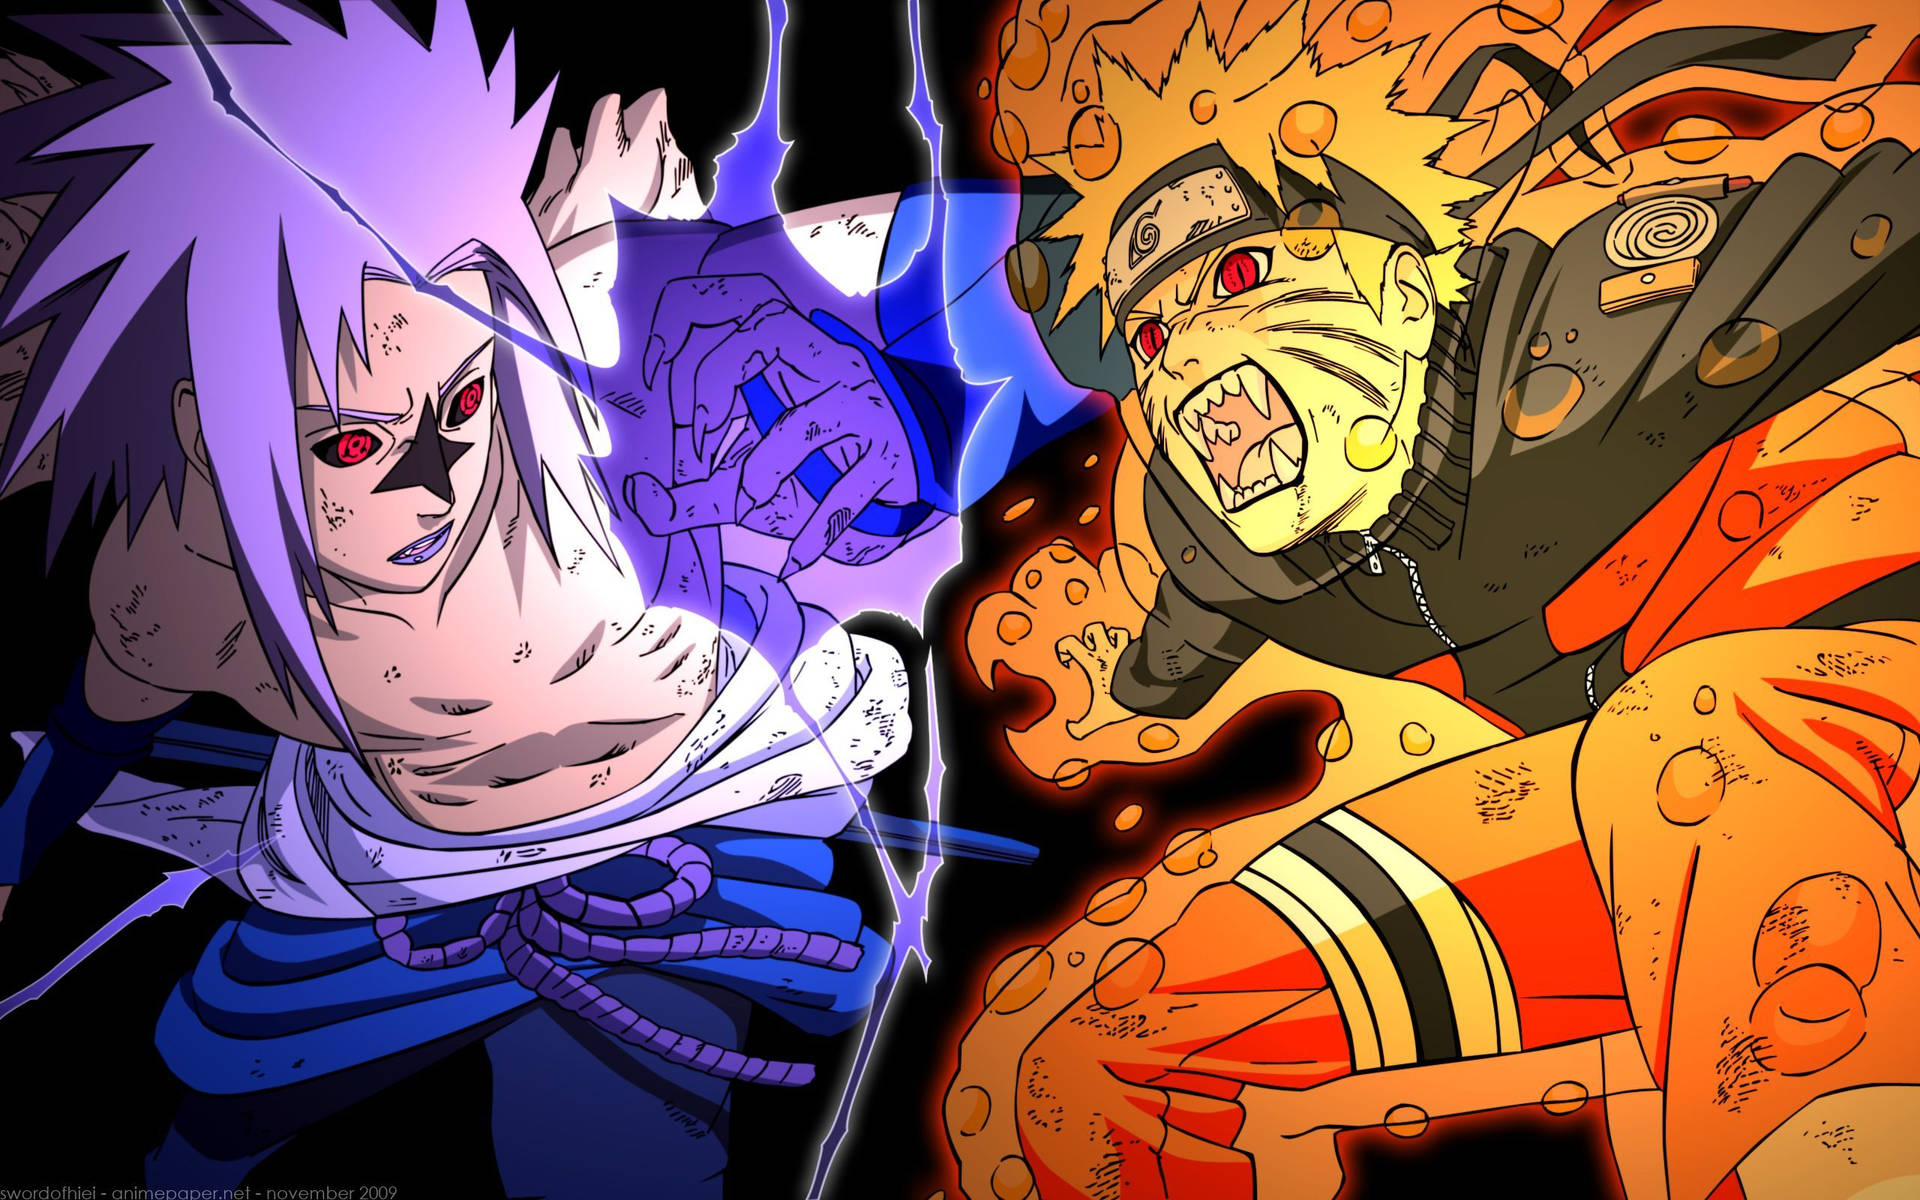 Wallpaper Naruto Pictures Wallpapers